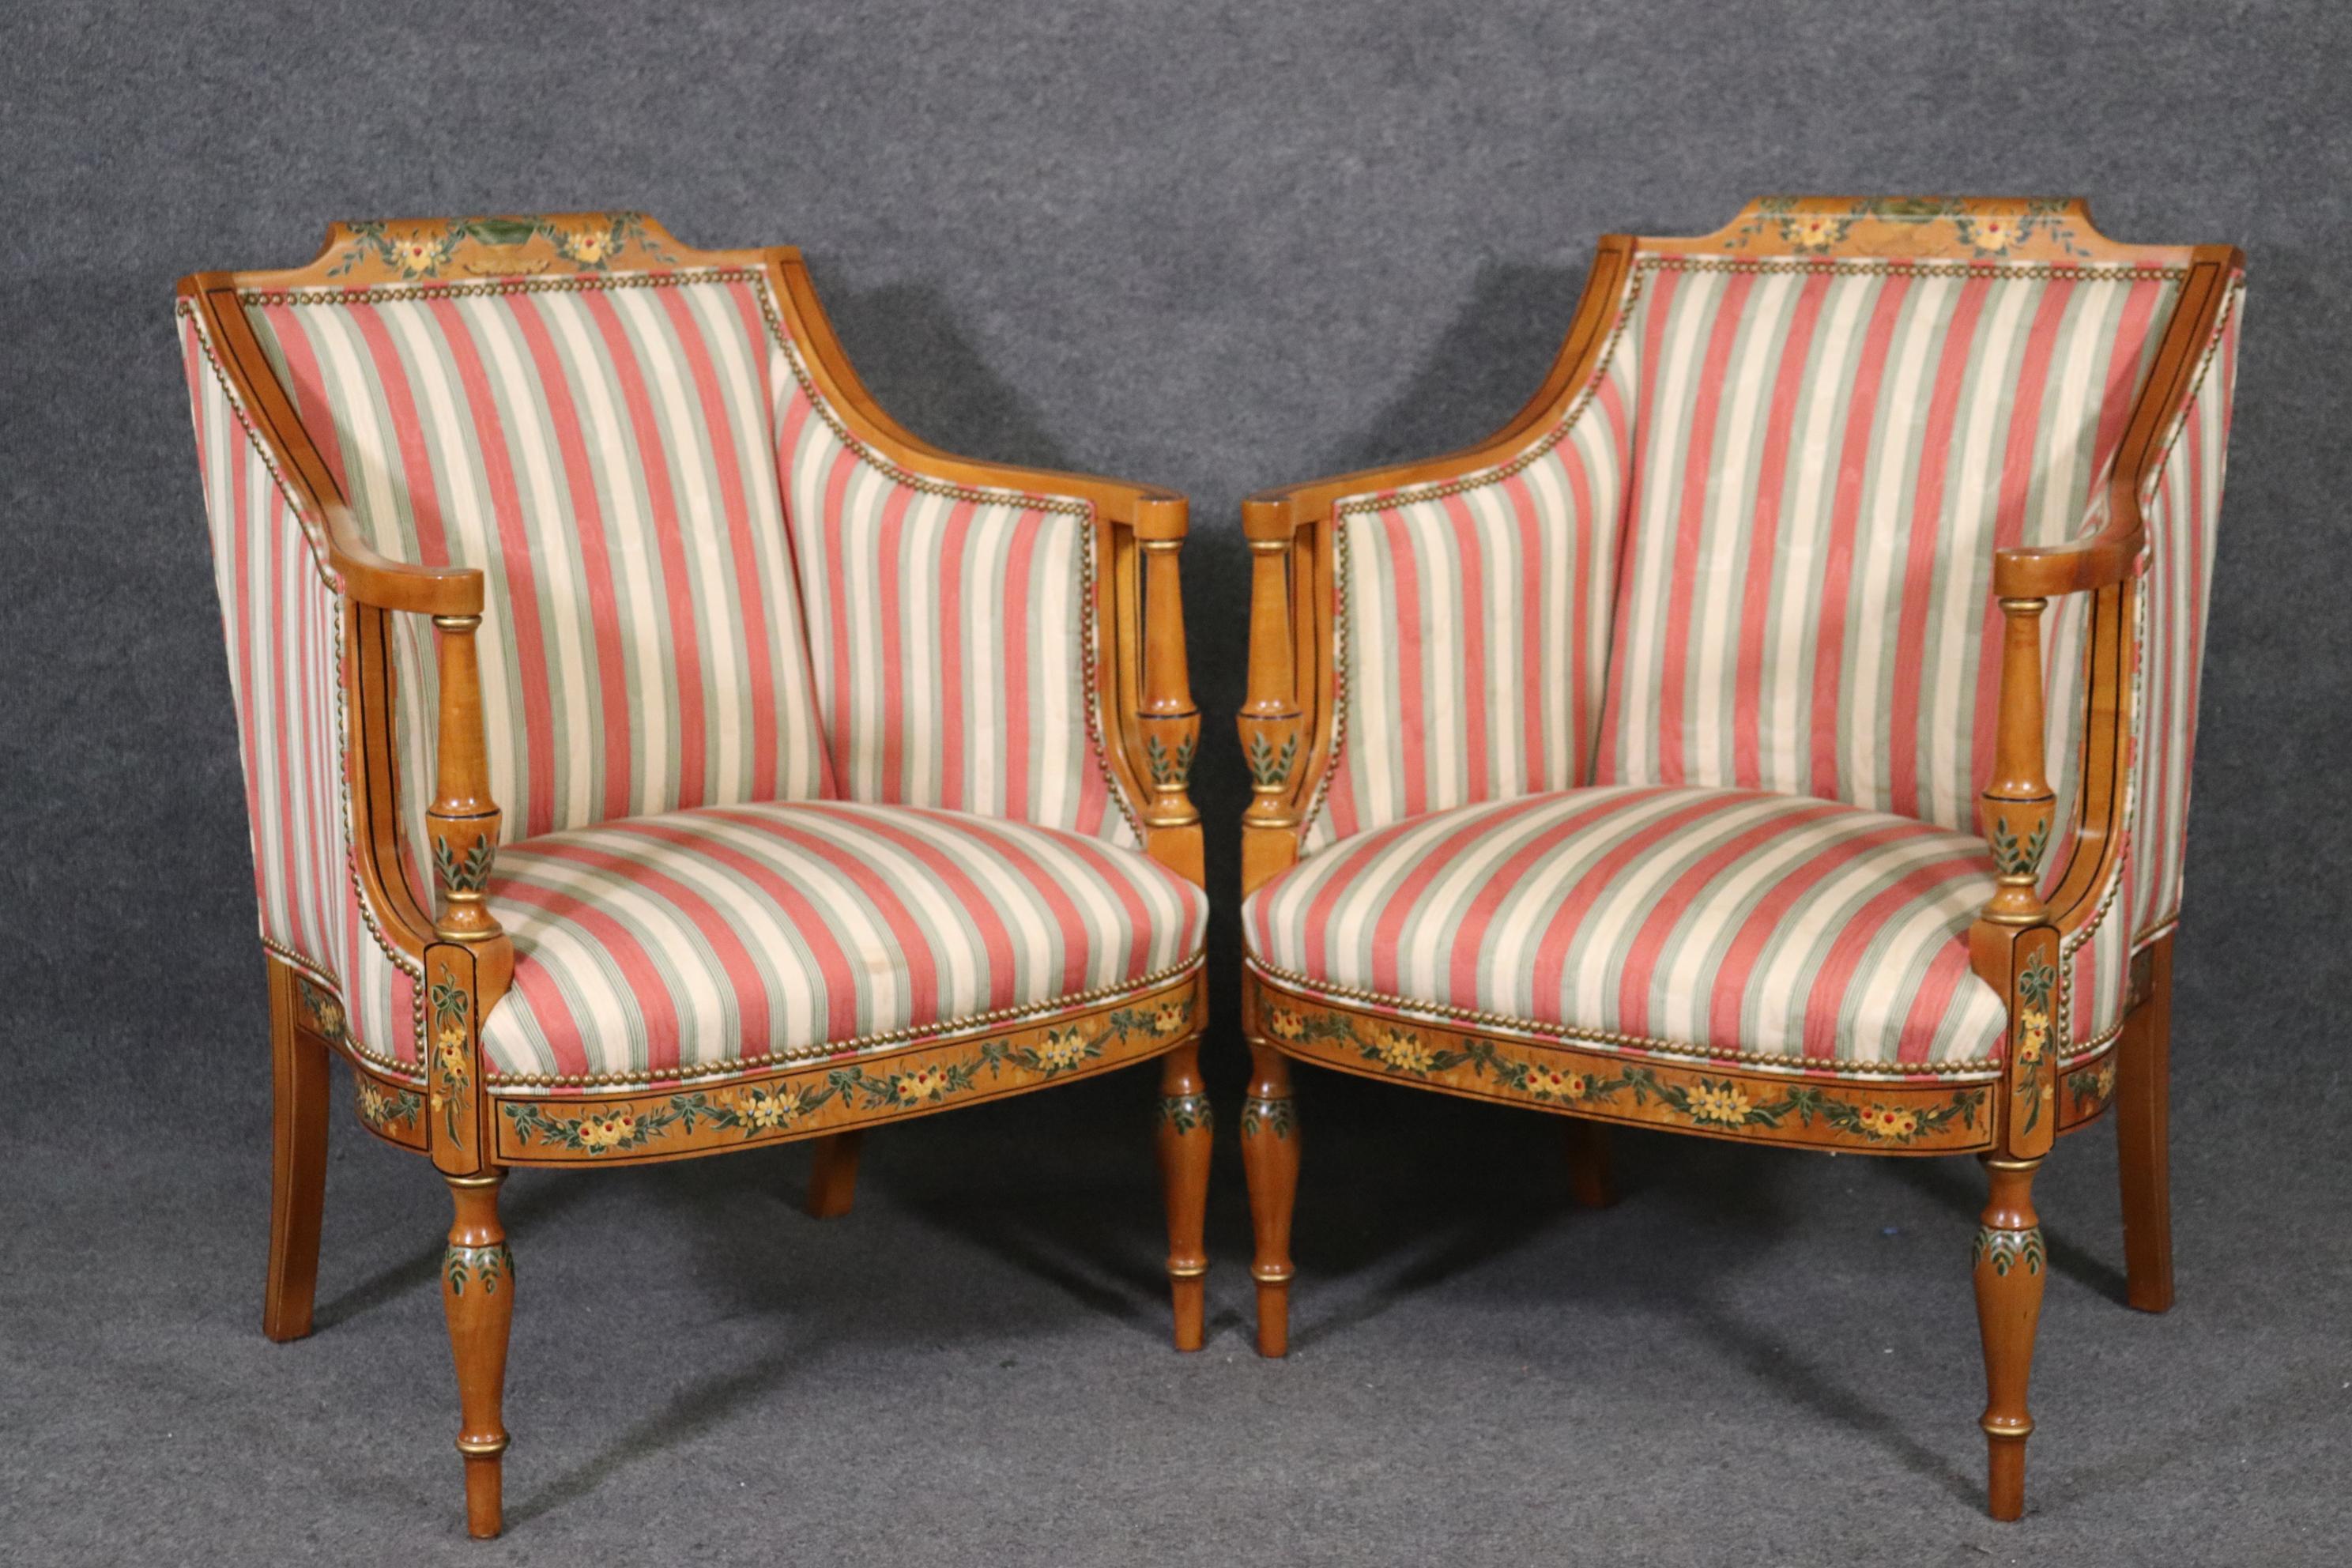 This is a gorgeous pair of English made satinwood Adams style bergere chairs. They are in good condition with very minor signs of any wear. There is a matched settee listed seperately. The chairs measure 26 deep x 37 tall x 28 wide x 17 inch seat